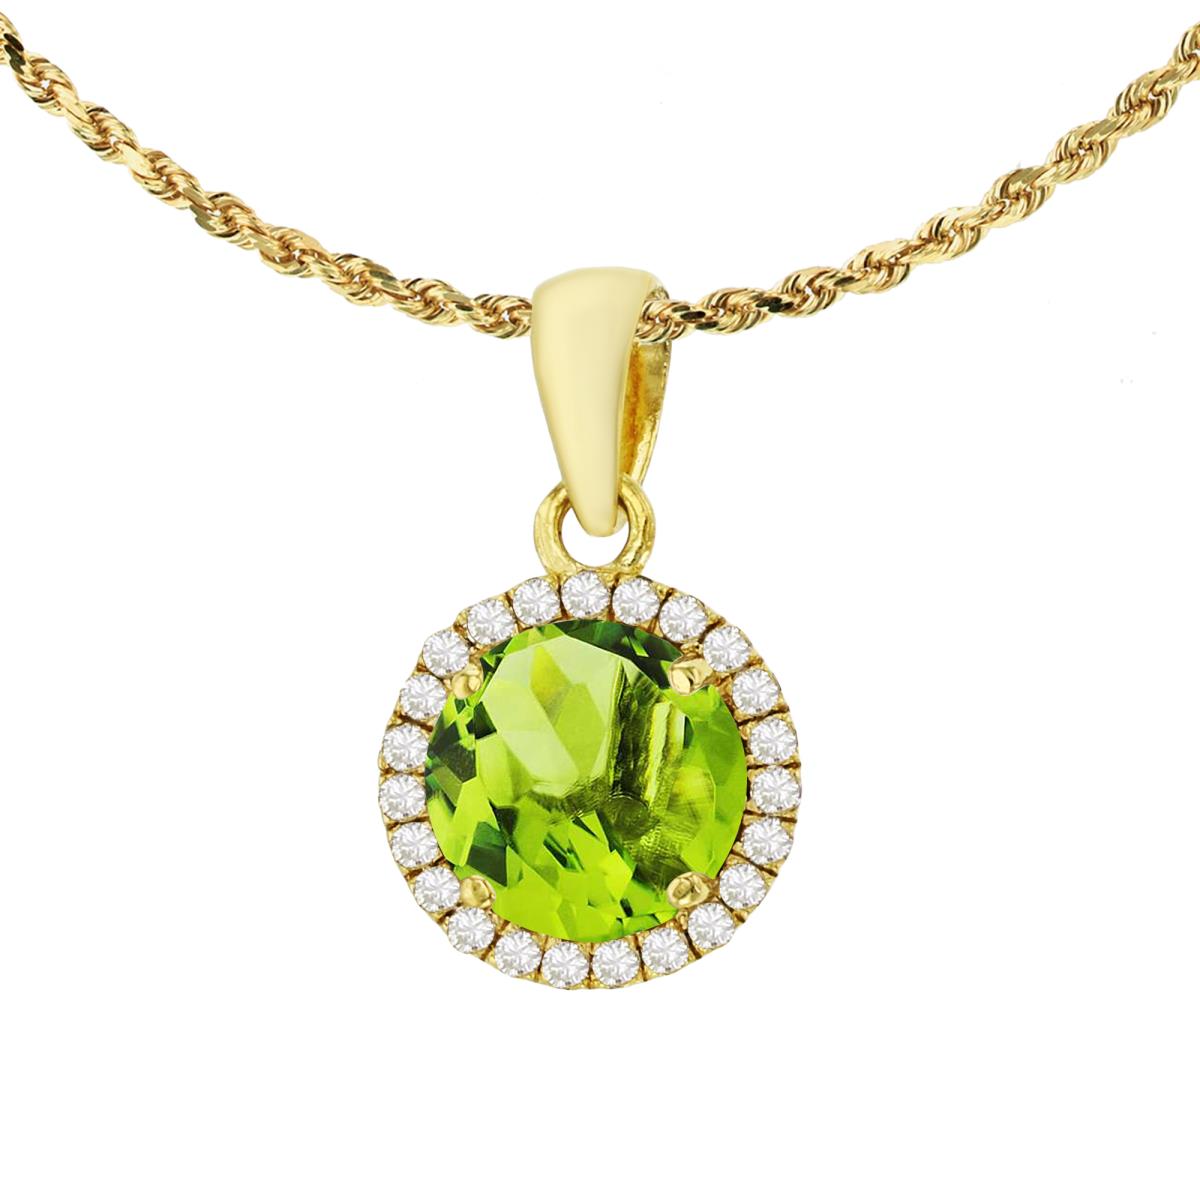 10K Yellow Gold 7mm Round Peridot & 0.12 CTTW Diamond Halo 18" Rope Chain Necklace